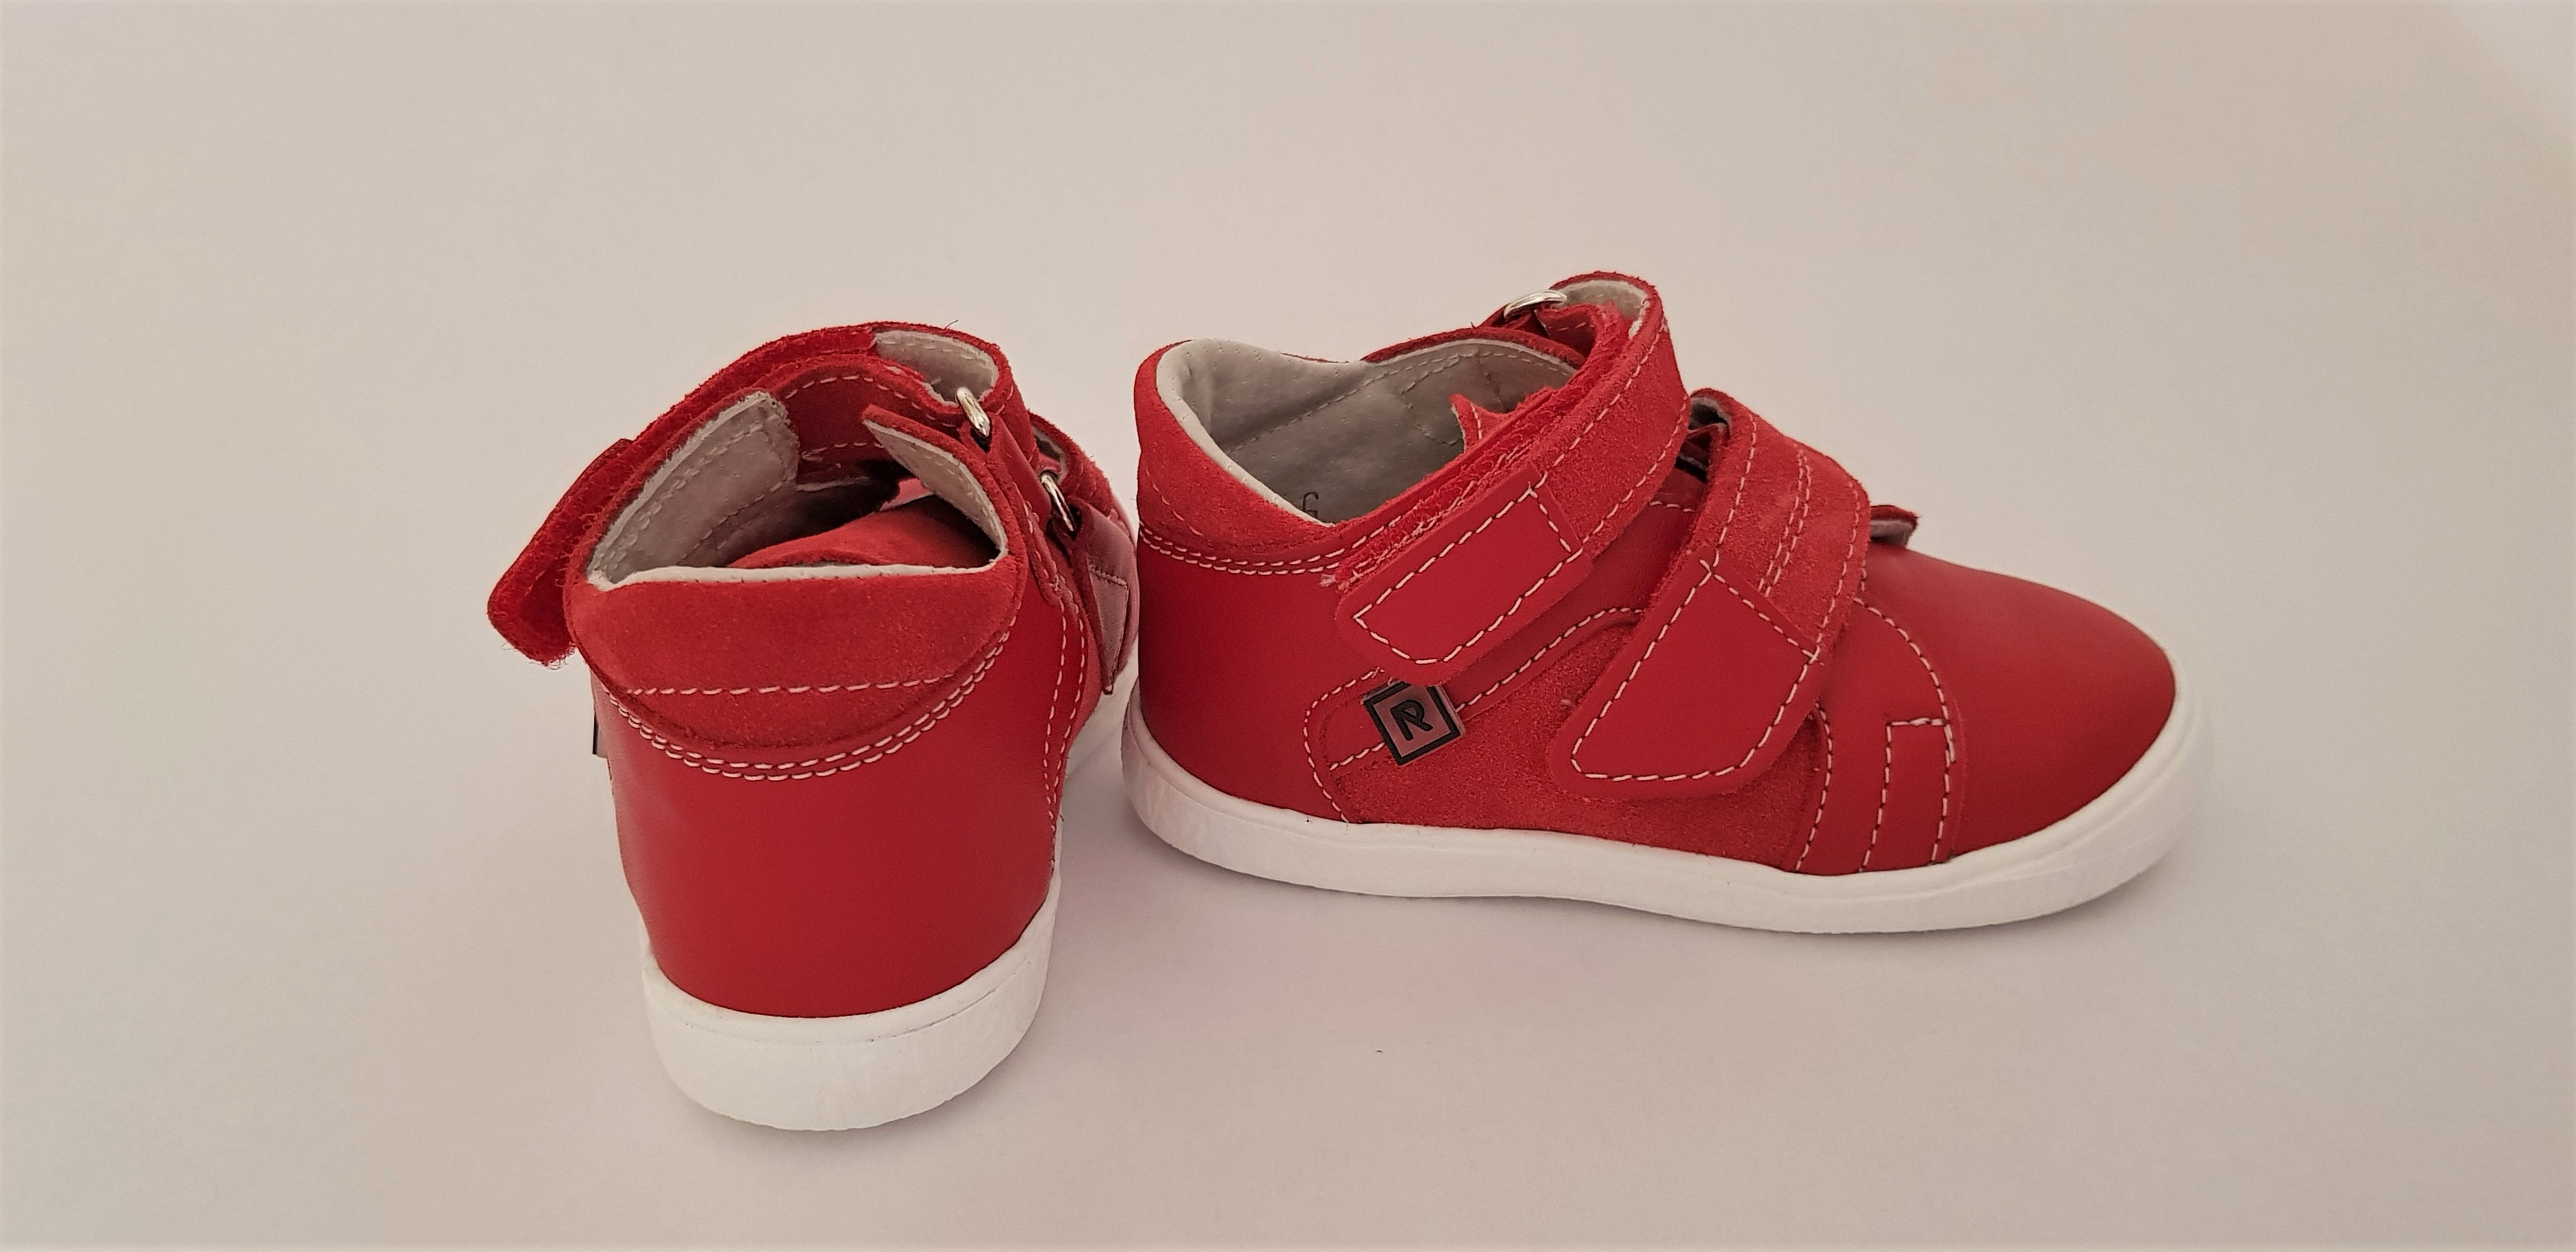 Children's Shoes - Red